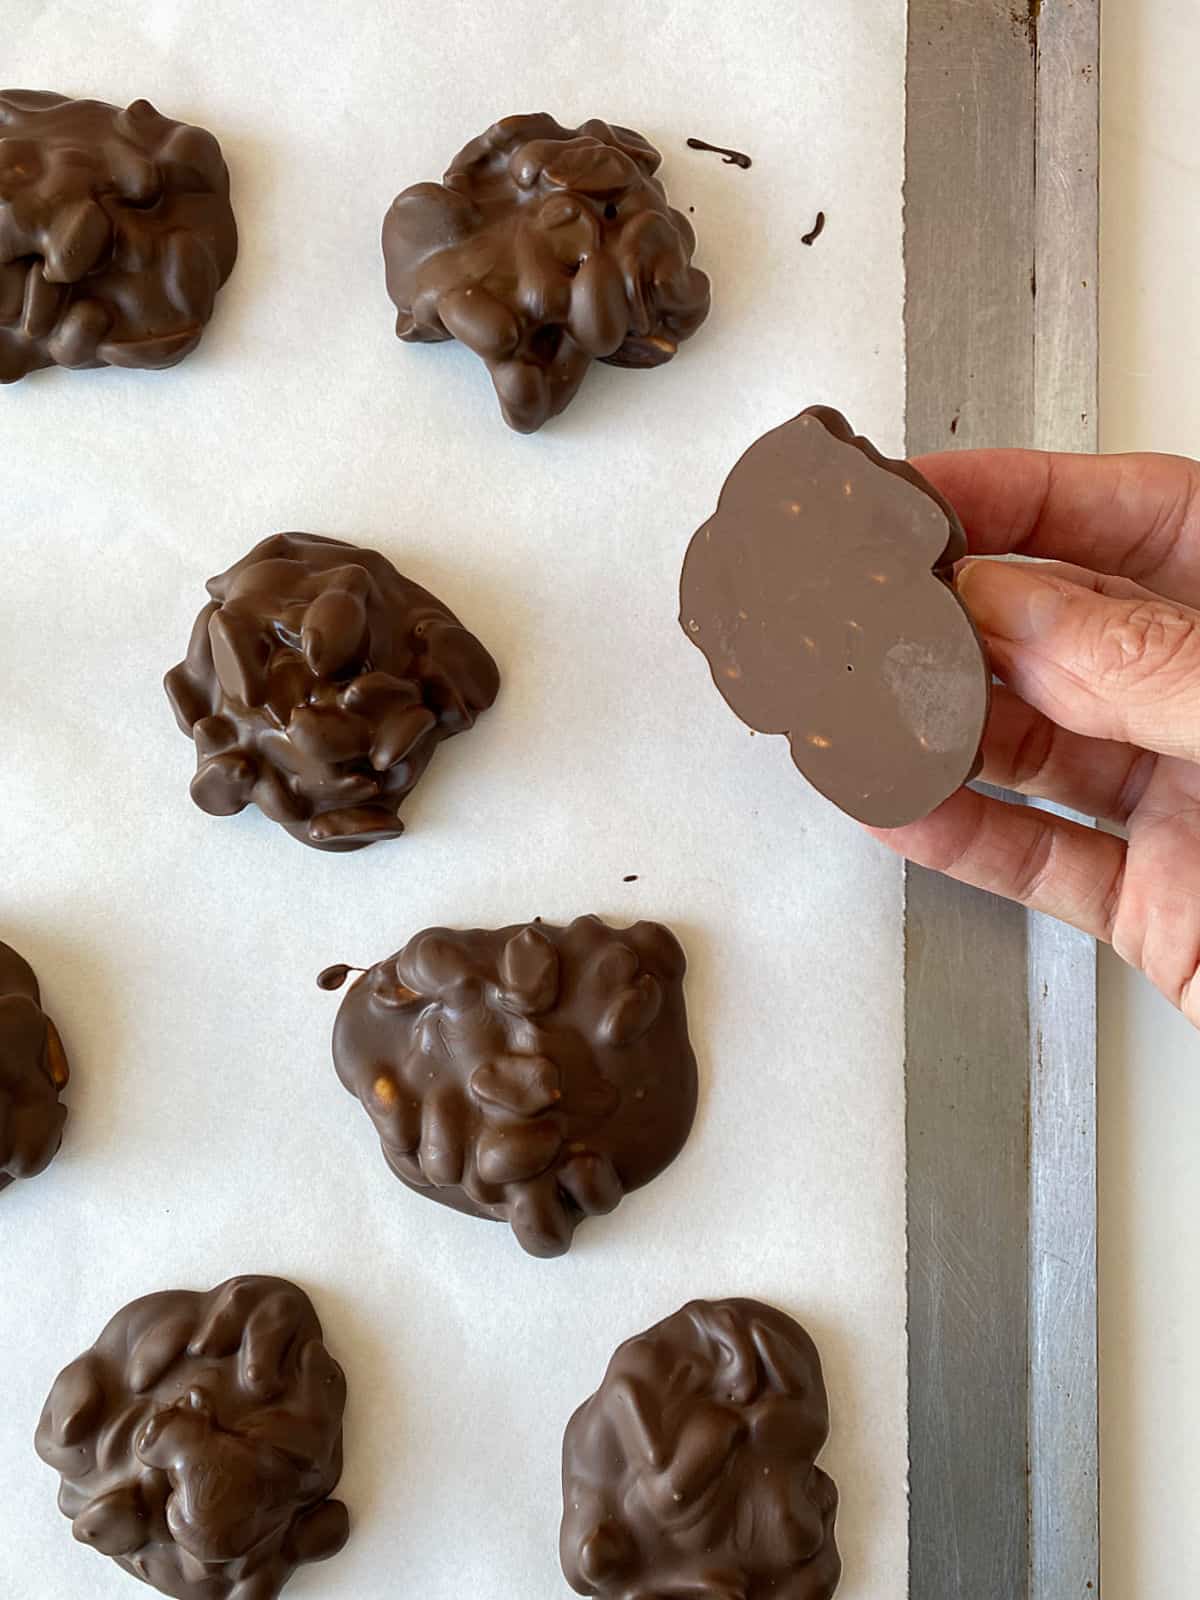 Several dried chocolate peanut clusters on white parchment and hand showing bottom of one of them.